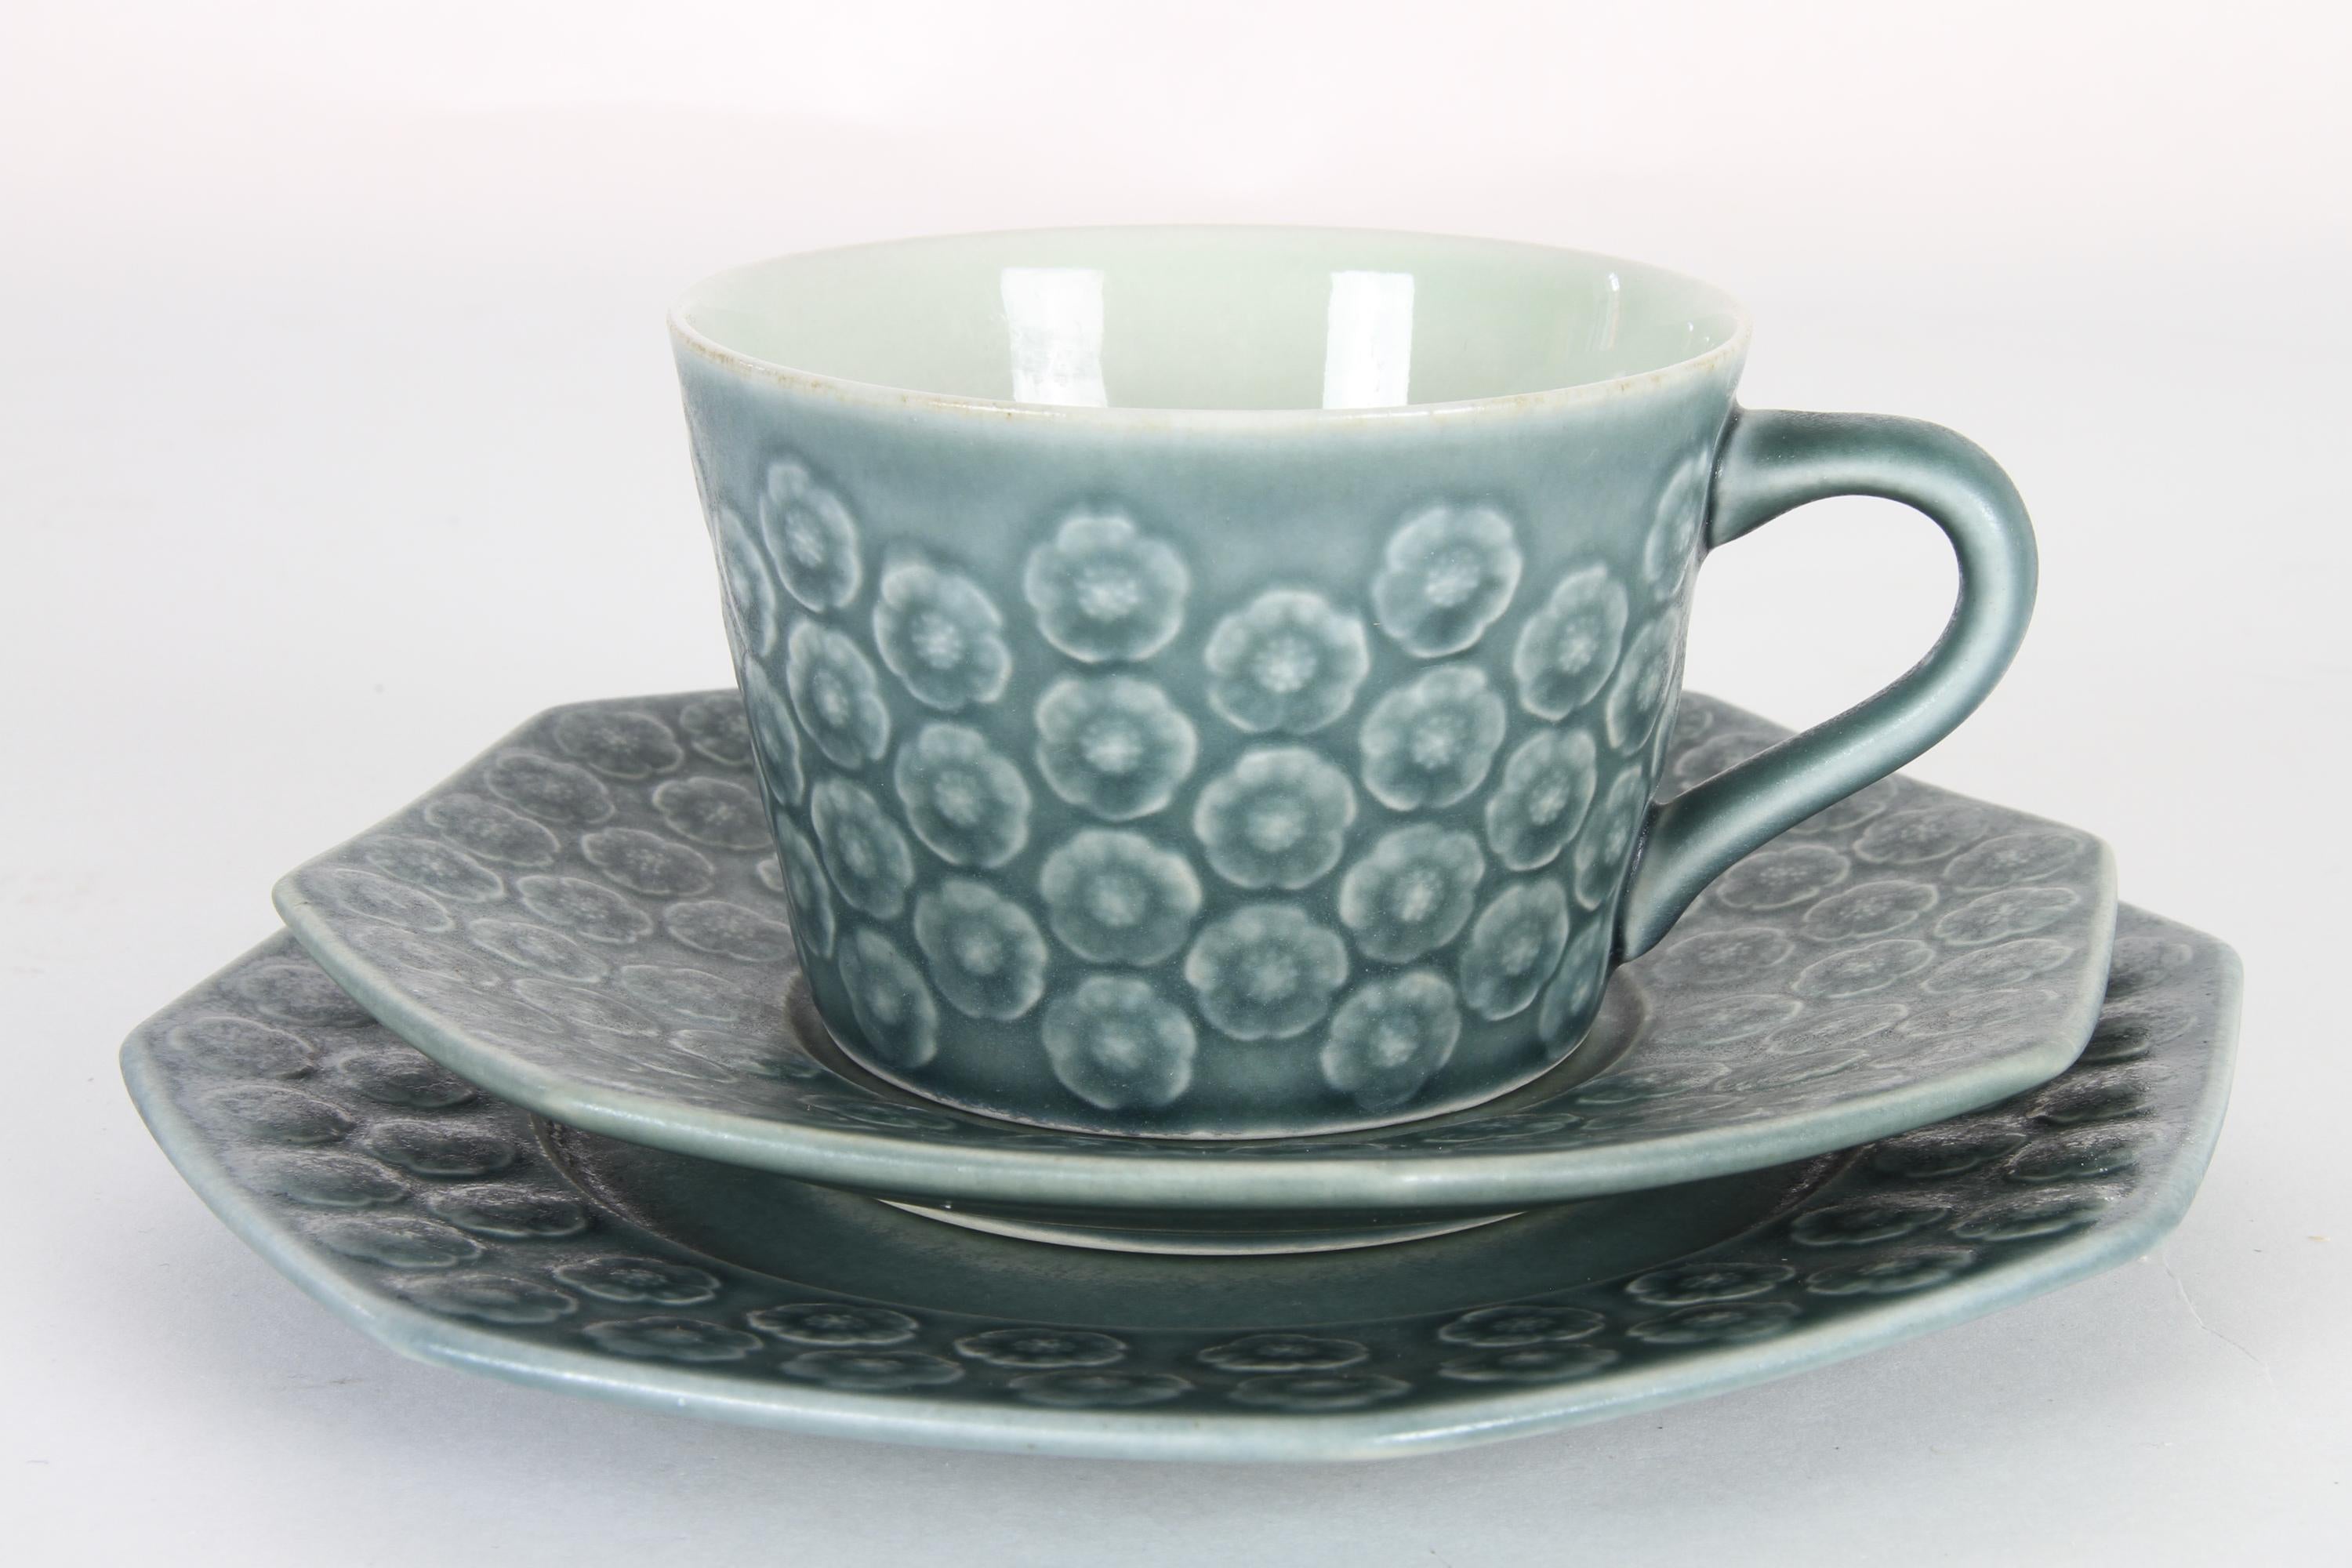 Vintage Danish Azur coffee/tea service trio by Jens H. Quistgaard for Kronjyden.
This beautiful Mid-Century Modern stoneware set by IHQ consists of a cup, a saucer and a side plate. Very lovely delicate flower pattern in the color azur, hence the